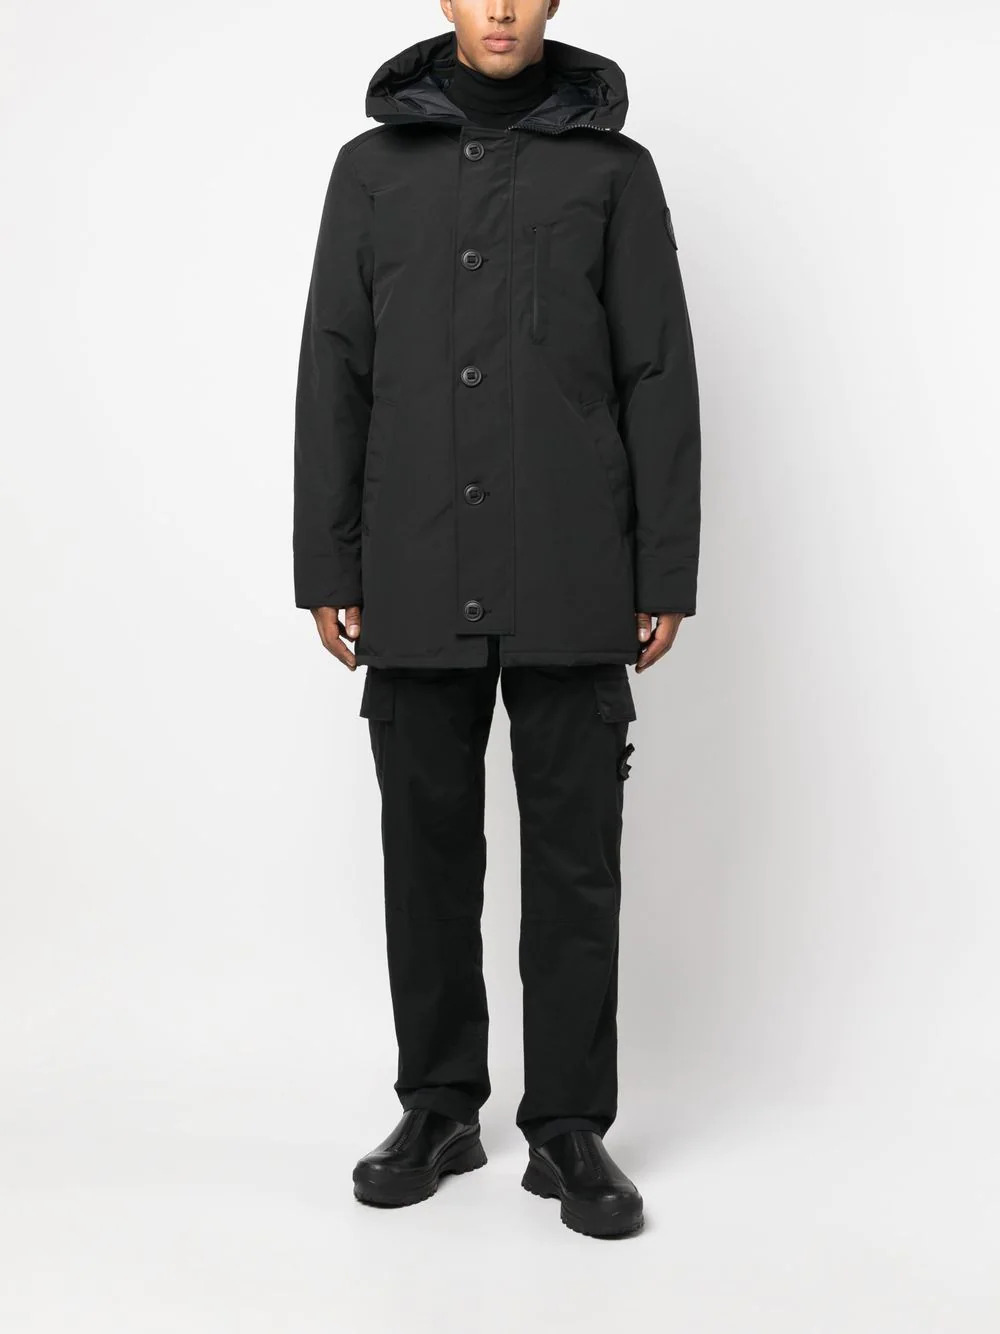 CANADA GOOSE Chateau Parka | S | 2053MB 61 S